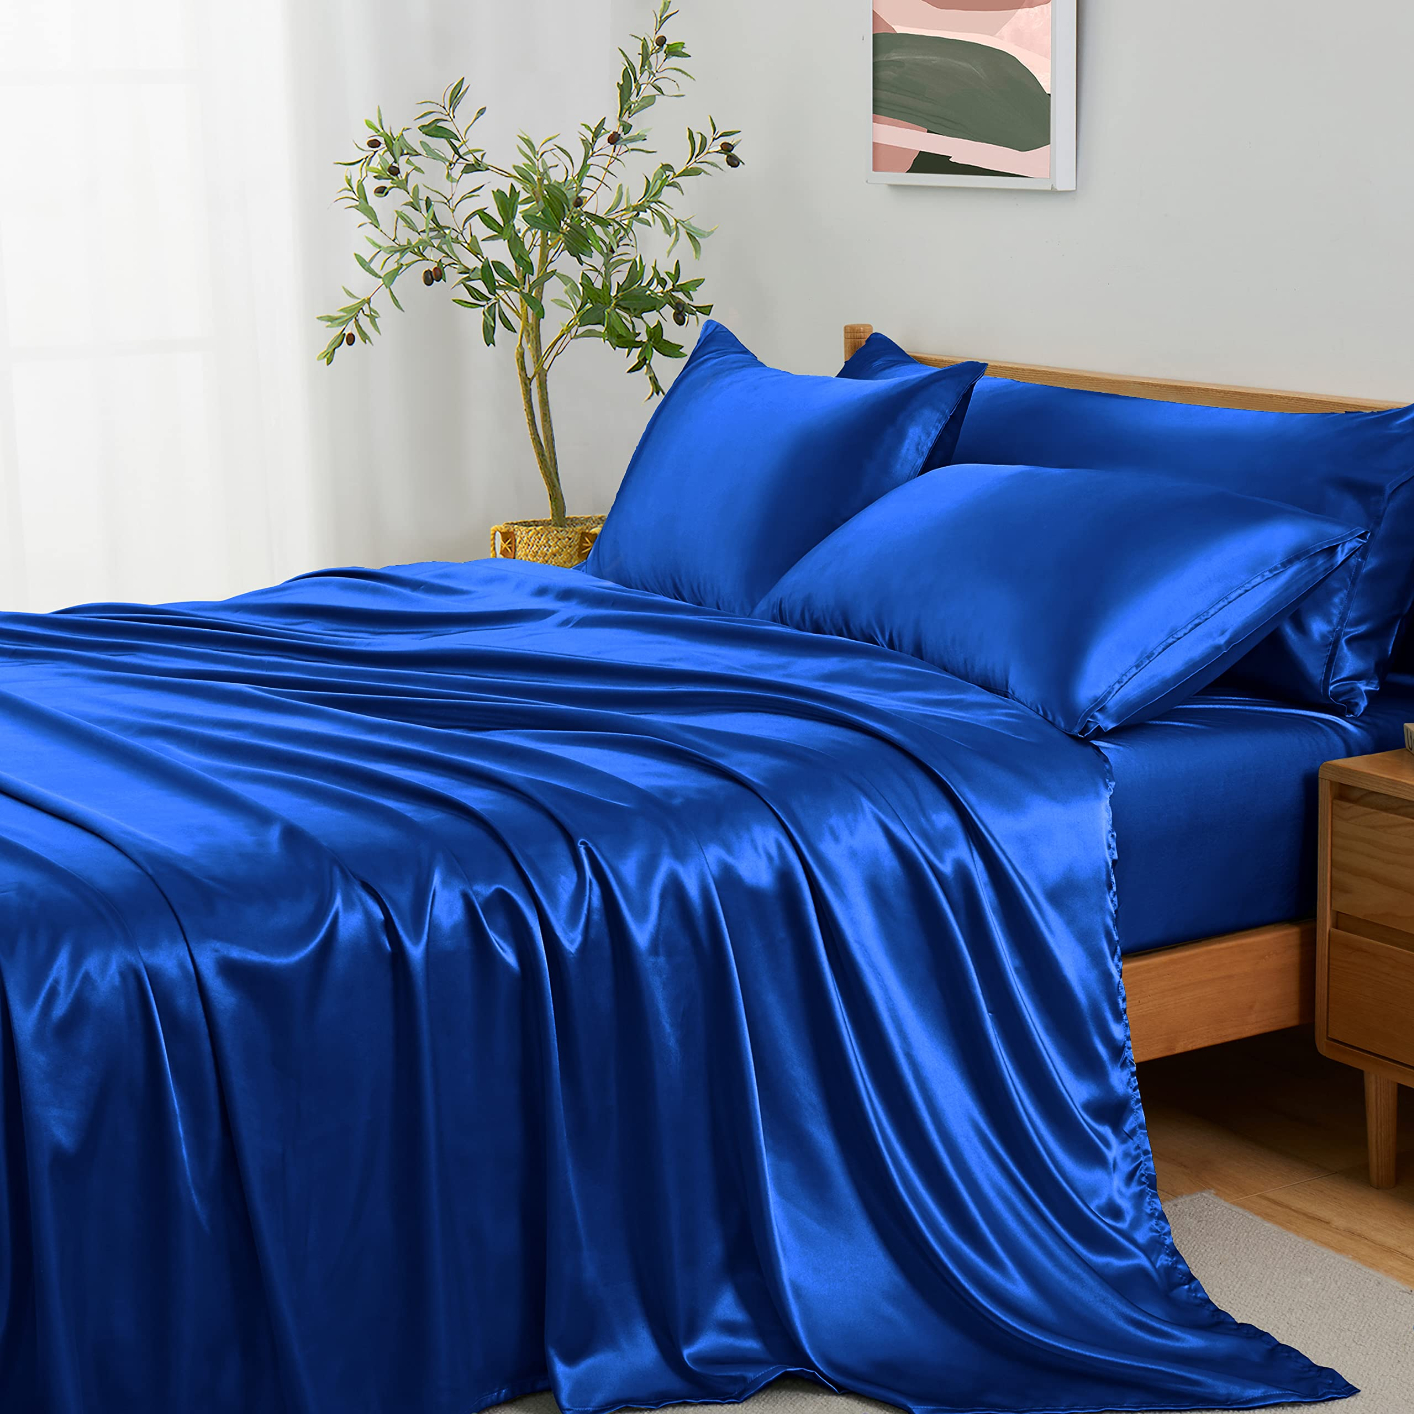 JT013-8 Twin XL Sheets 4pcs XL Twin Sheet Set Twin XL Fitted Sheet Extra Long Twin Sheets Soft & Long Lasting 100% Fine Brushed Microfiber Polyester
